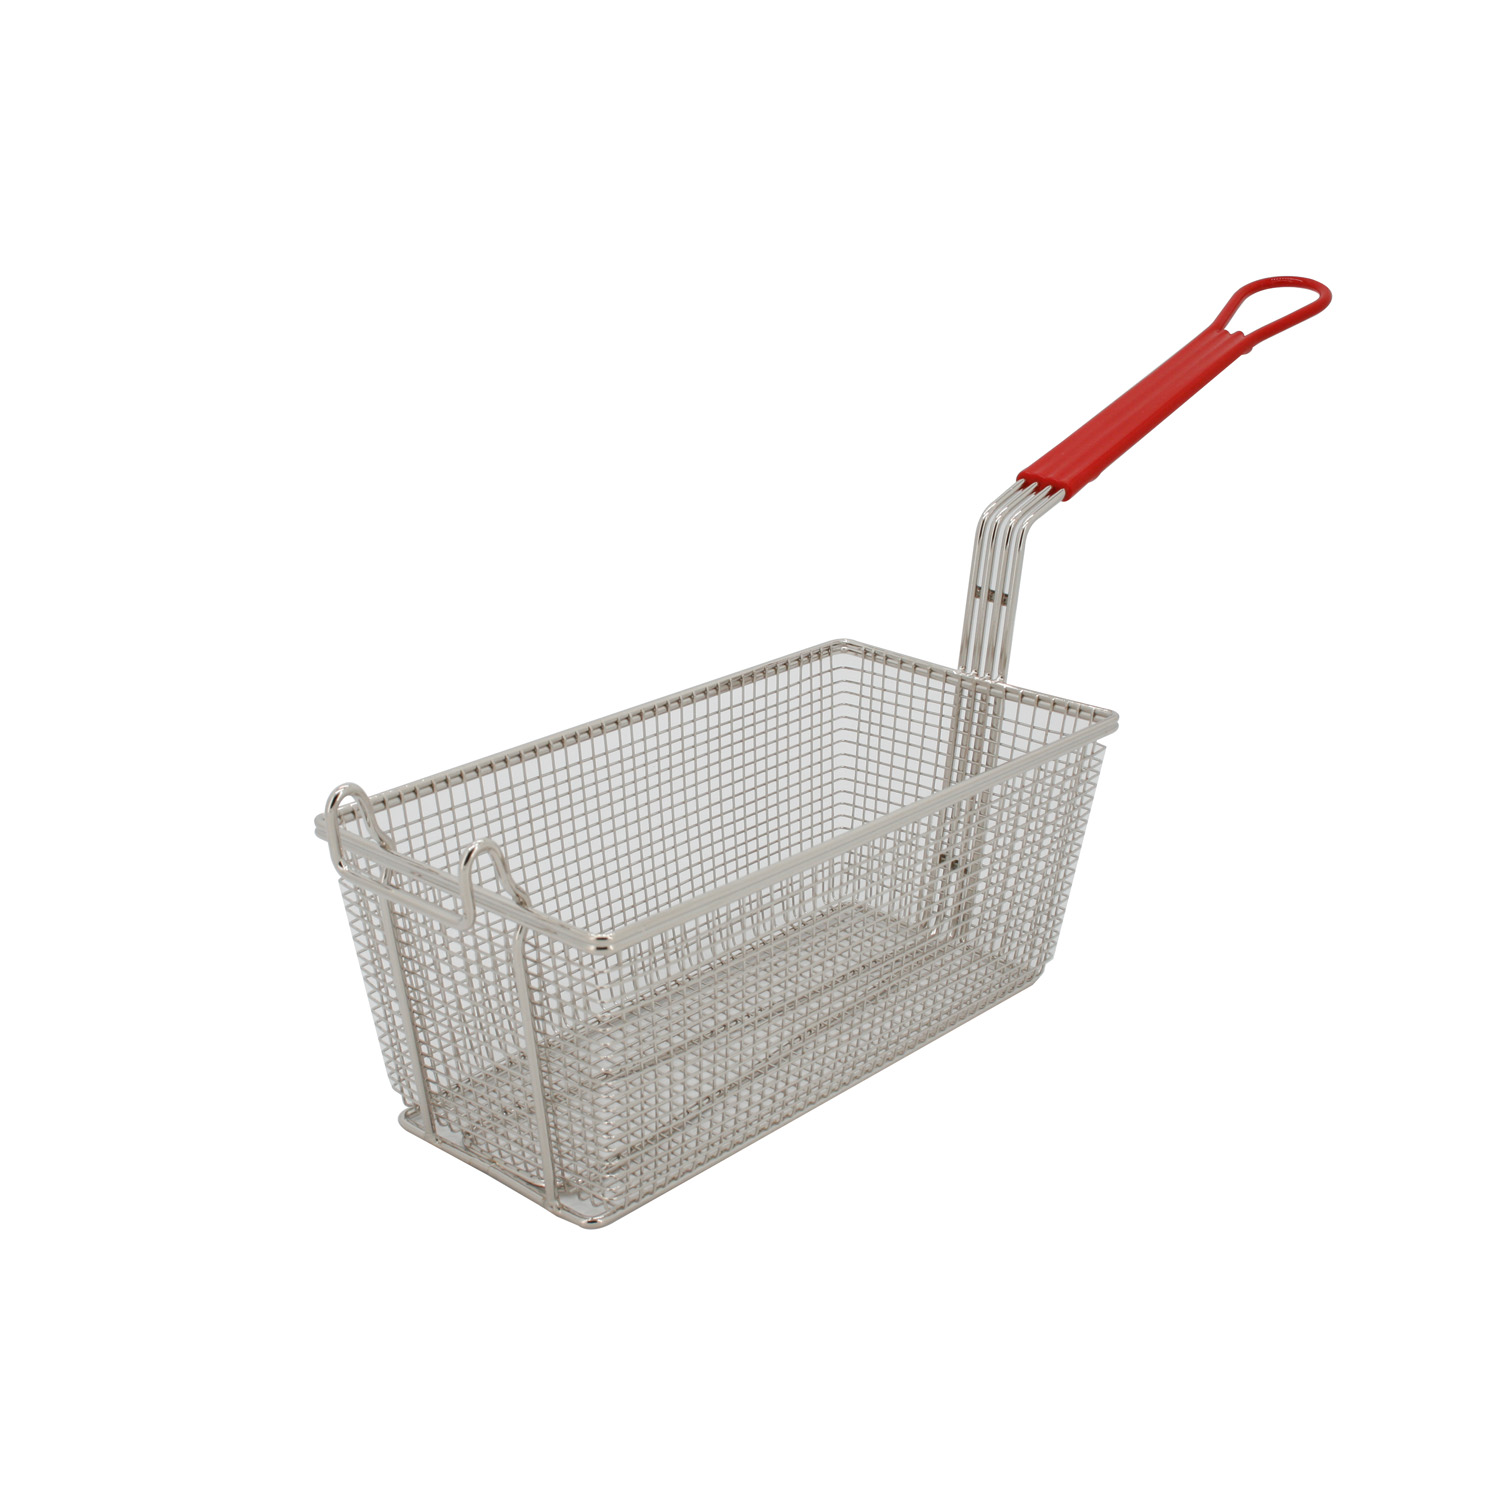 CAC China SPFB-4 Nickel-Plated Fry Basket with Red Handle 12-7/8" x 6-5/8" x 5-3/8"